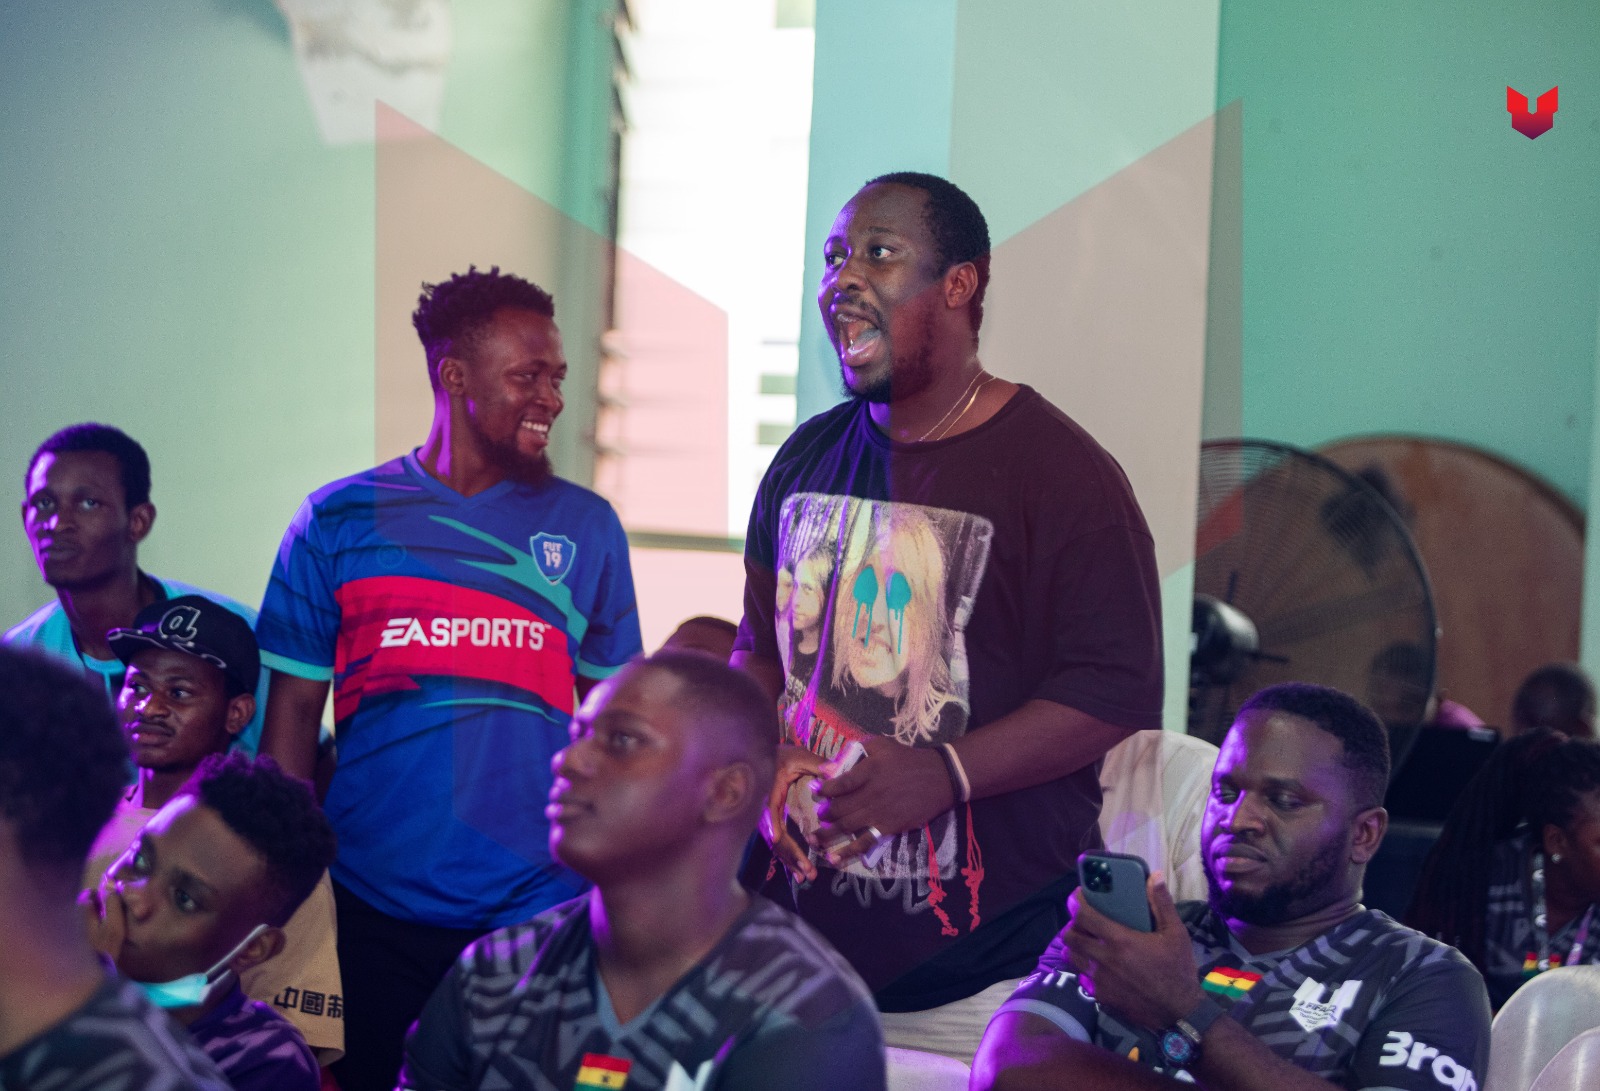 UPG FIFA22 Esports Tournament crowns PlayProvince 2022 Champions, brings Ghana's Esports Scene to new heights